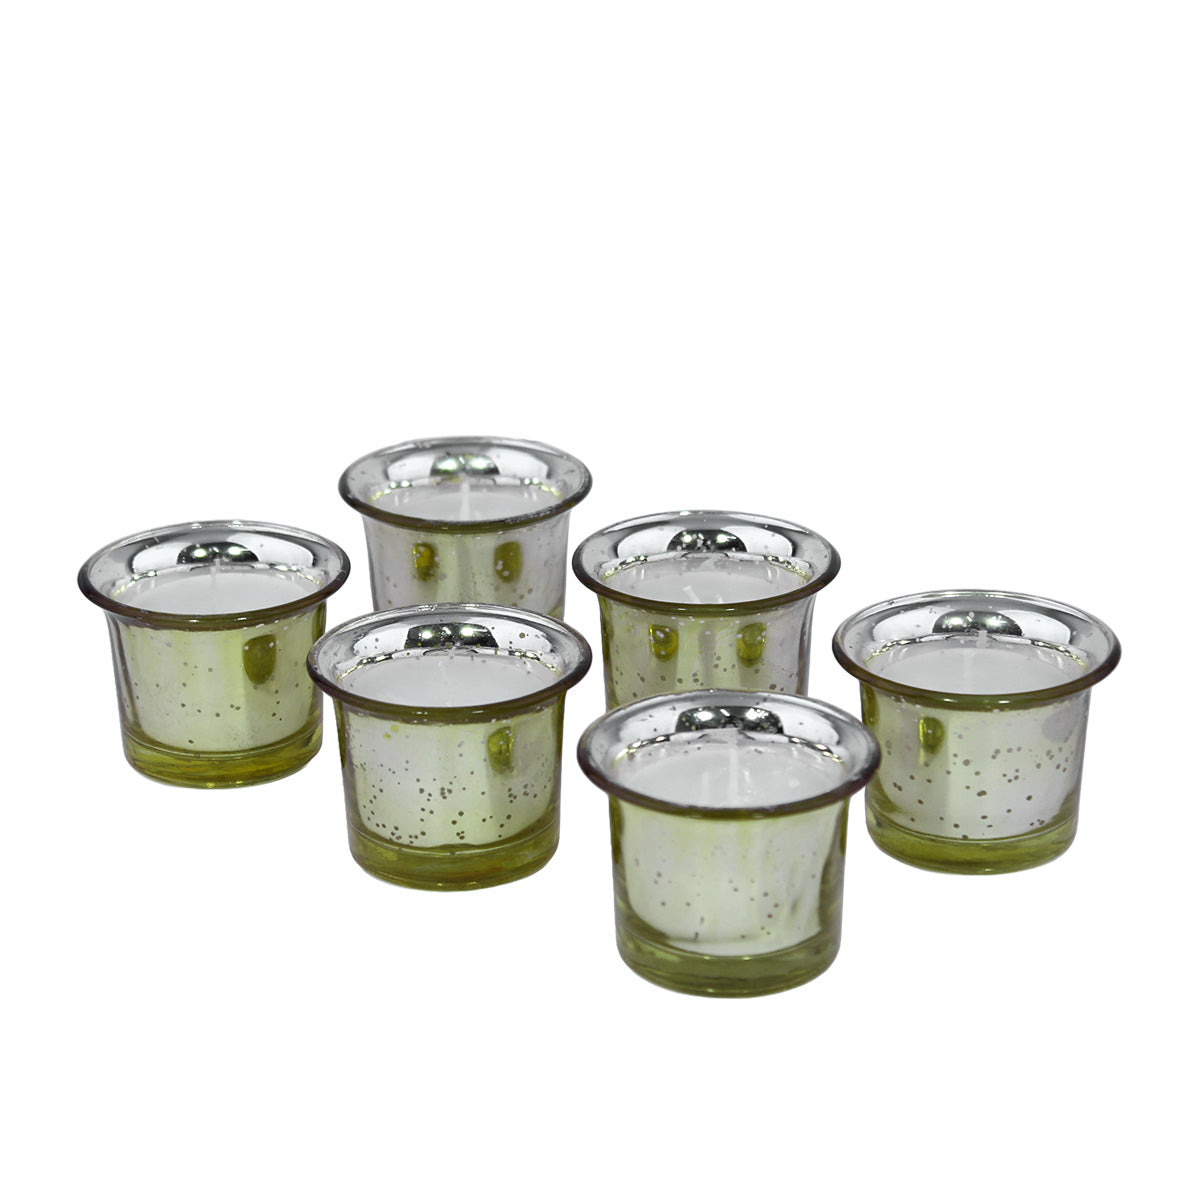 Hosley Fragranced Sweetpea Jasmine Filled Scented Votive Glass Candles / Candle Holder for Decoration Candles, Pack of 6, Golden